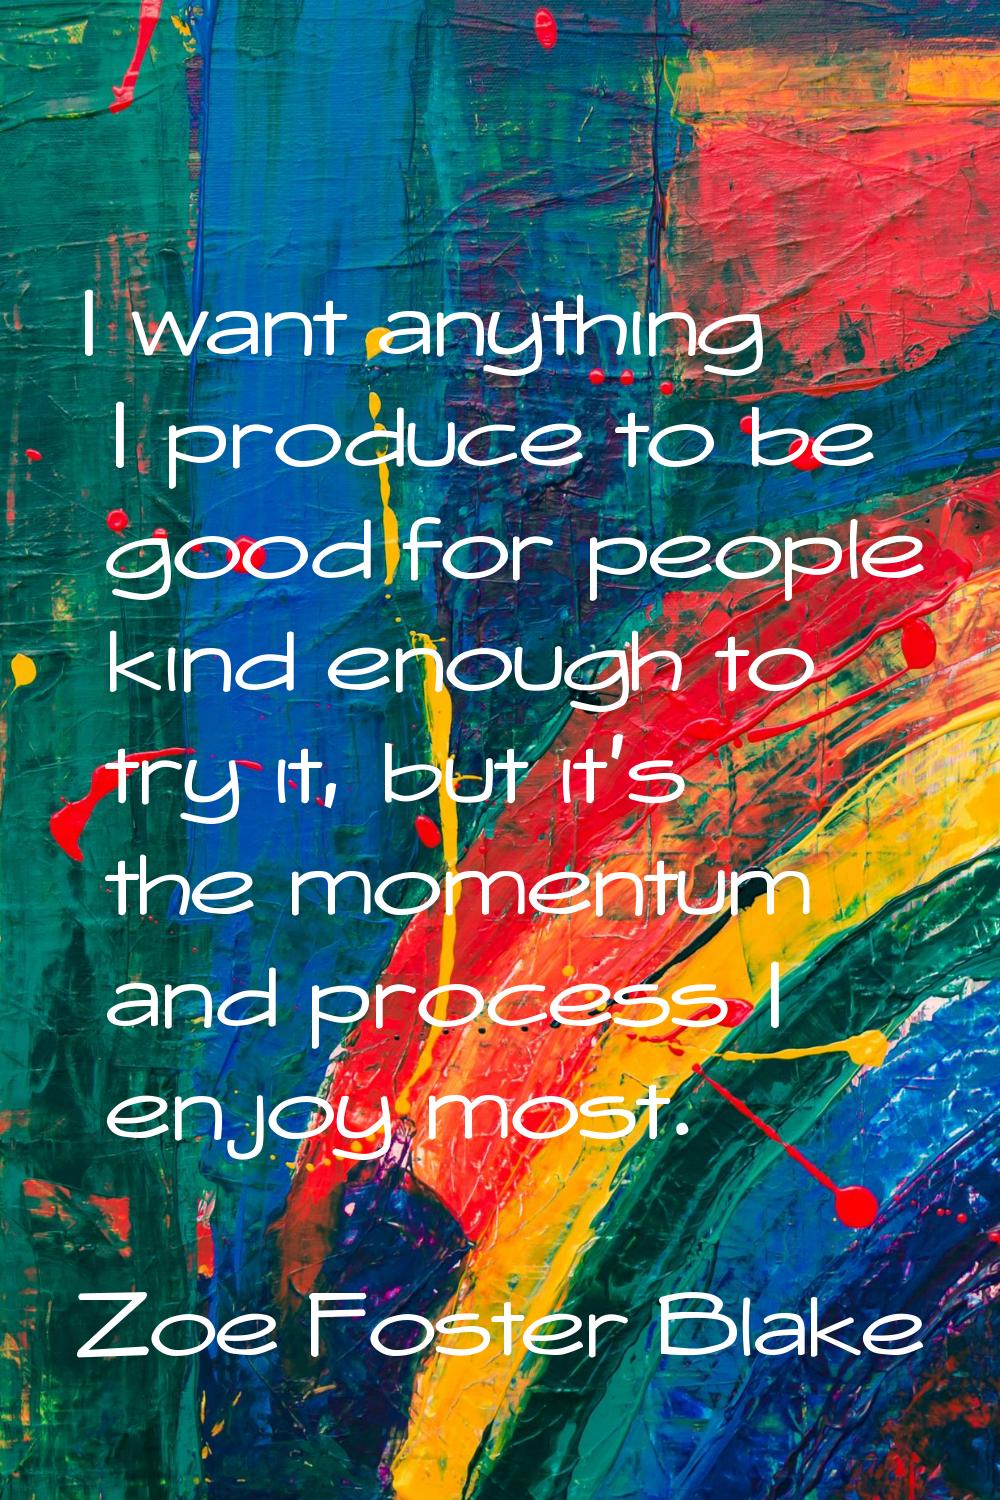 I want anything I produce to be good for people kind enough to try it, but it's the momentum and pr